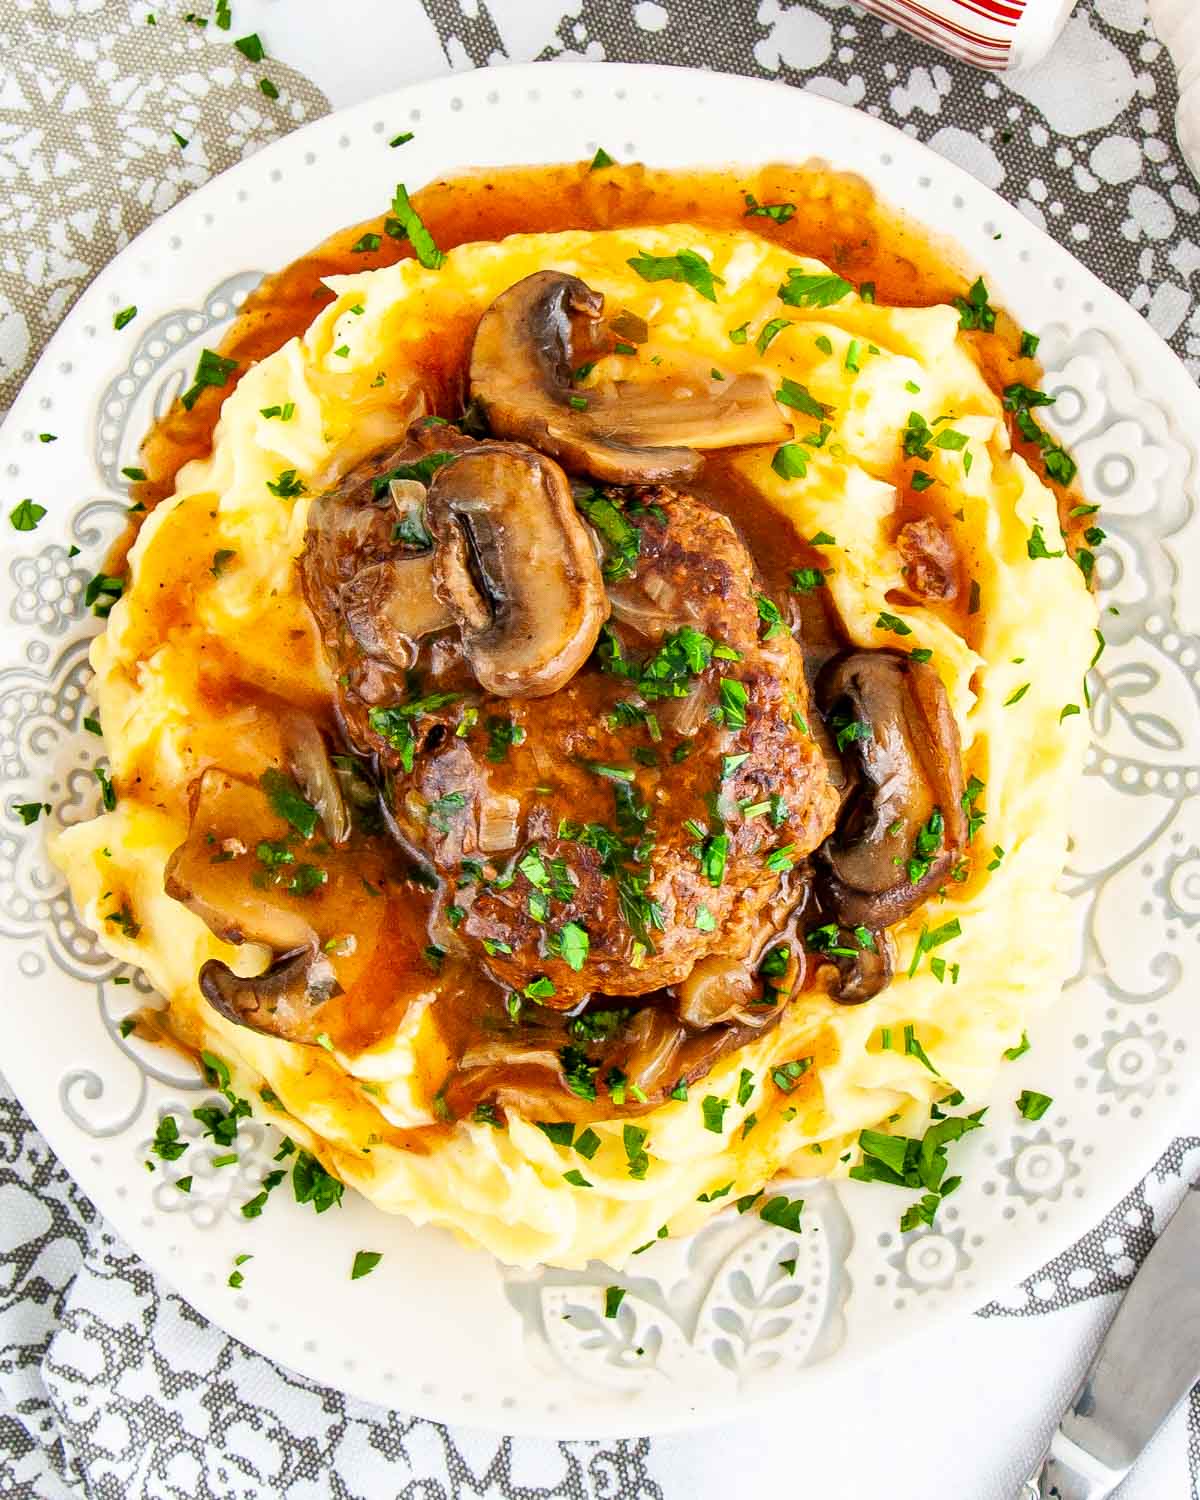 a salisbury steak over a bed of mashed potatoes garnished with parsley.